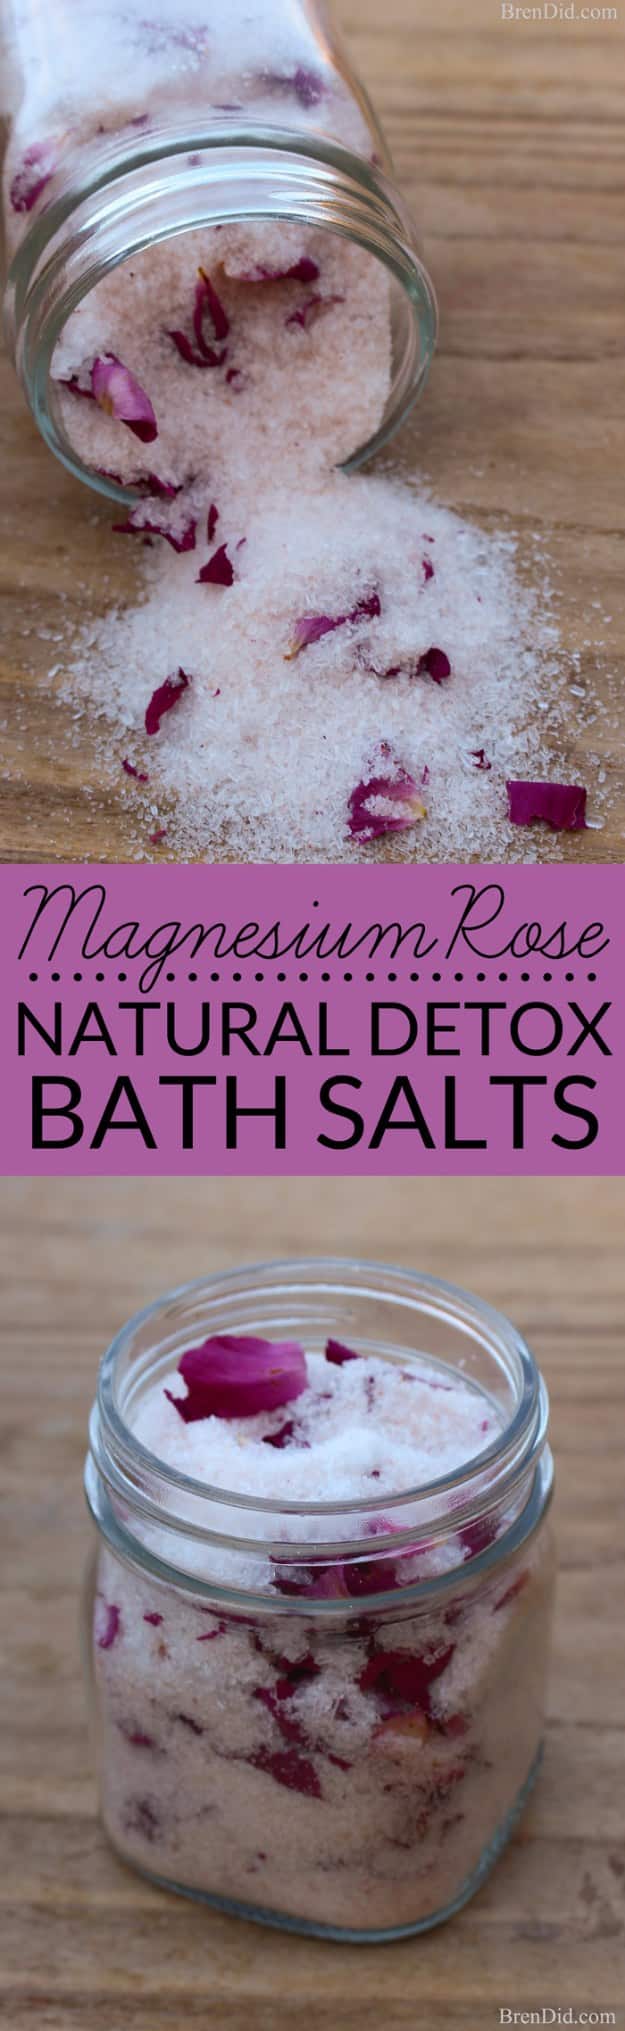 DIY Detox Recipes, Ideas and Tips - Magnesium Rose Natural Detox Bath Salts - How to Detox Your Body, Brain and Skin for Health and Weight Loss. Detox Drinks, Waters, Teas, Wraps, Soup, Masks and Skincare Products You Can Make At Home 